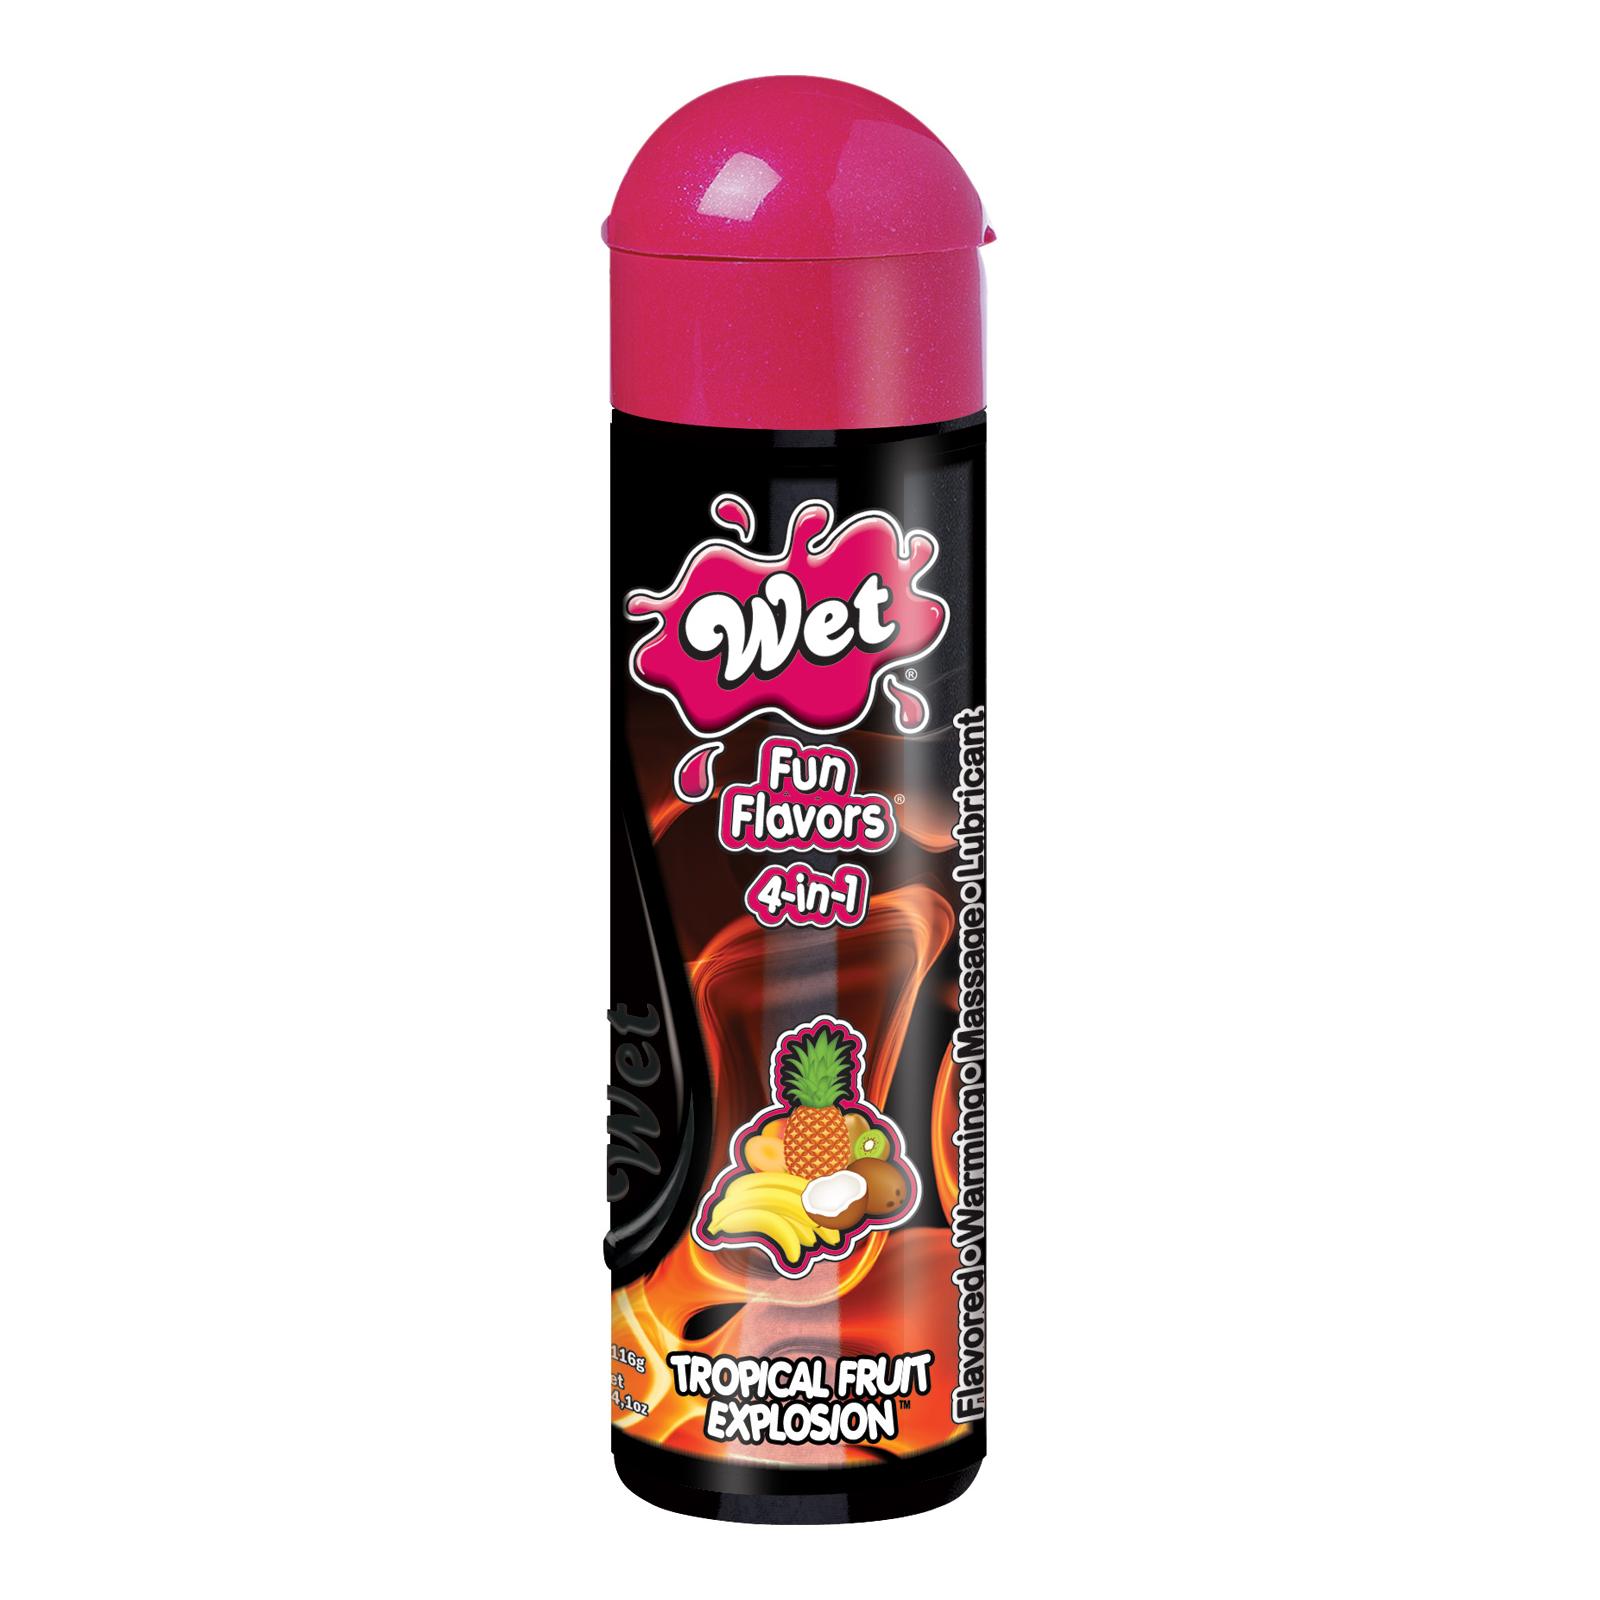 Wet Fun Flavors 4 In 1 Lubricant Tropical Fruit Explosion 4.1 Ounces